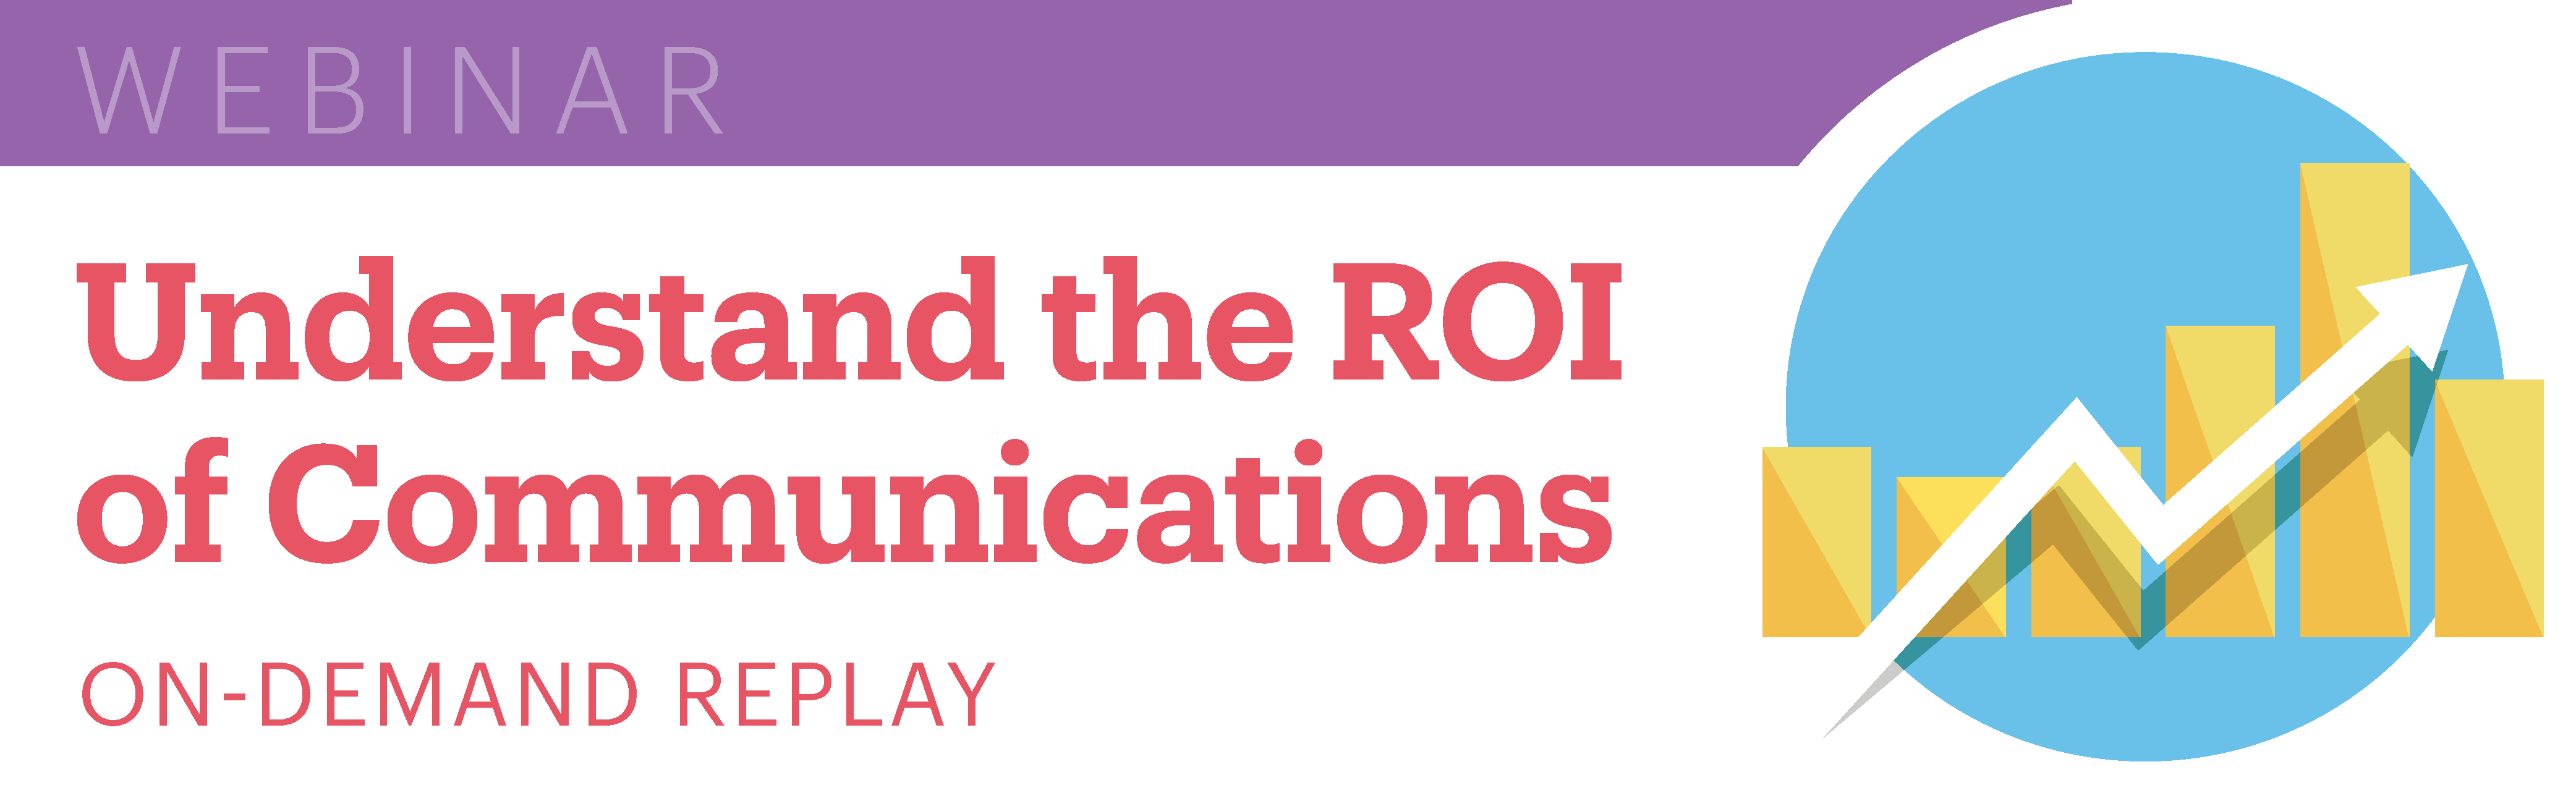 Understand the ROI of communication